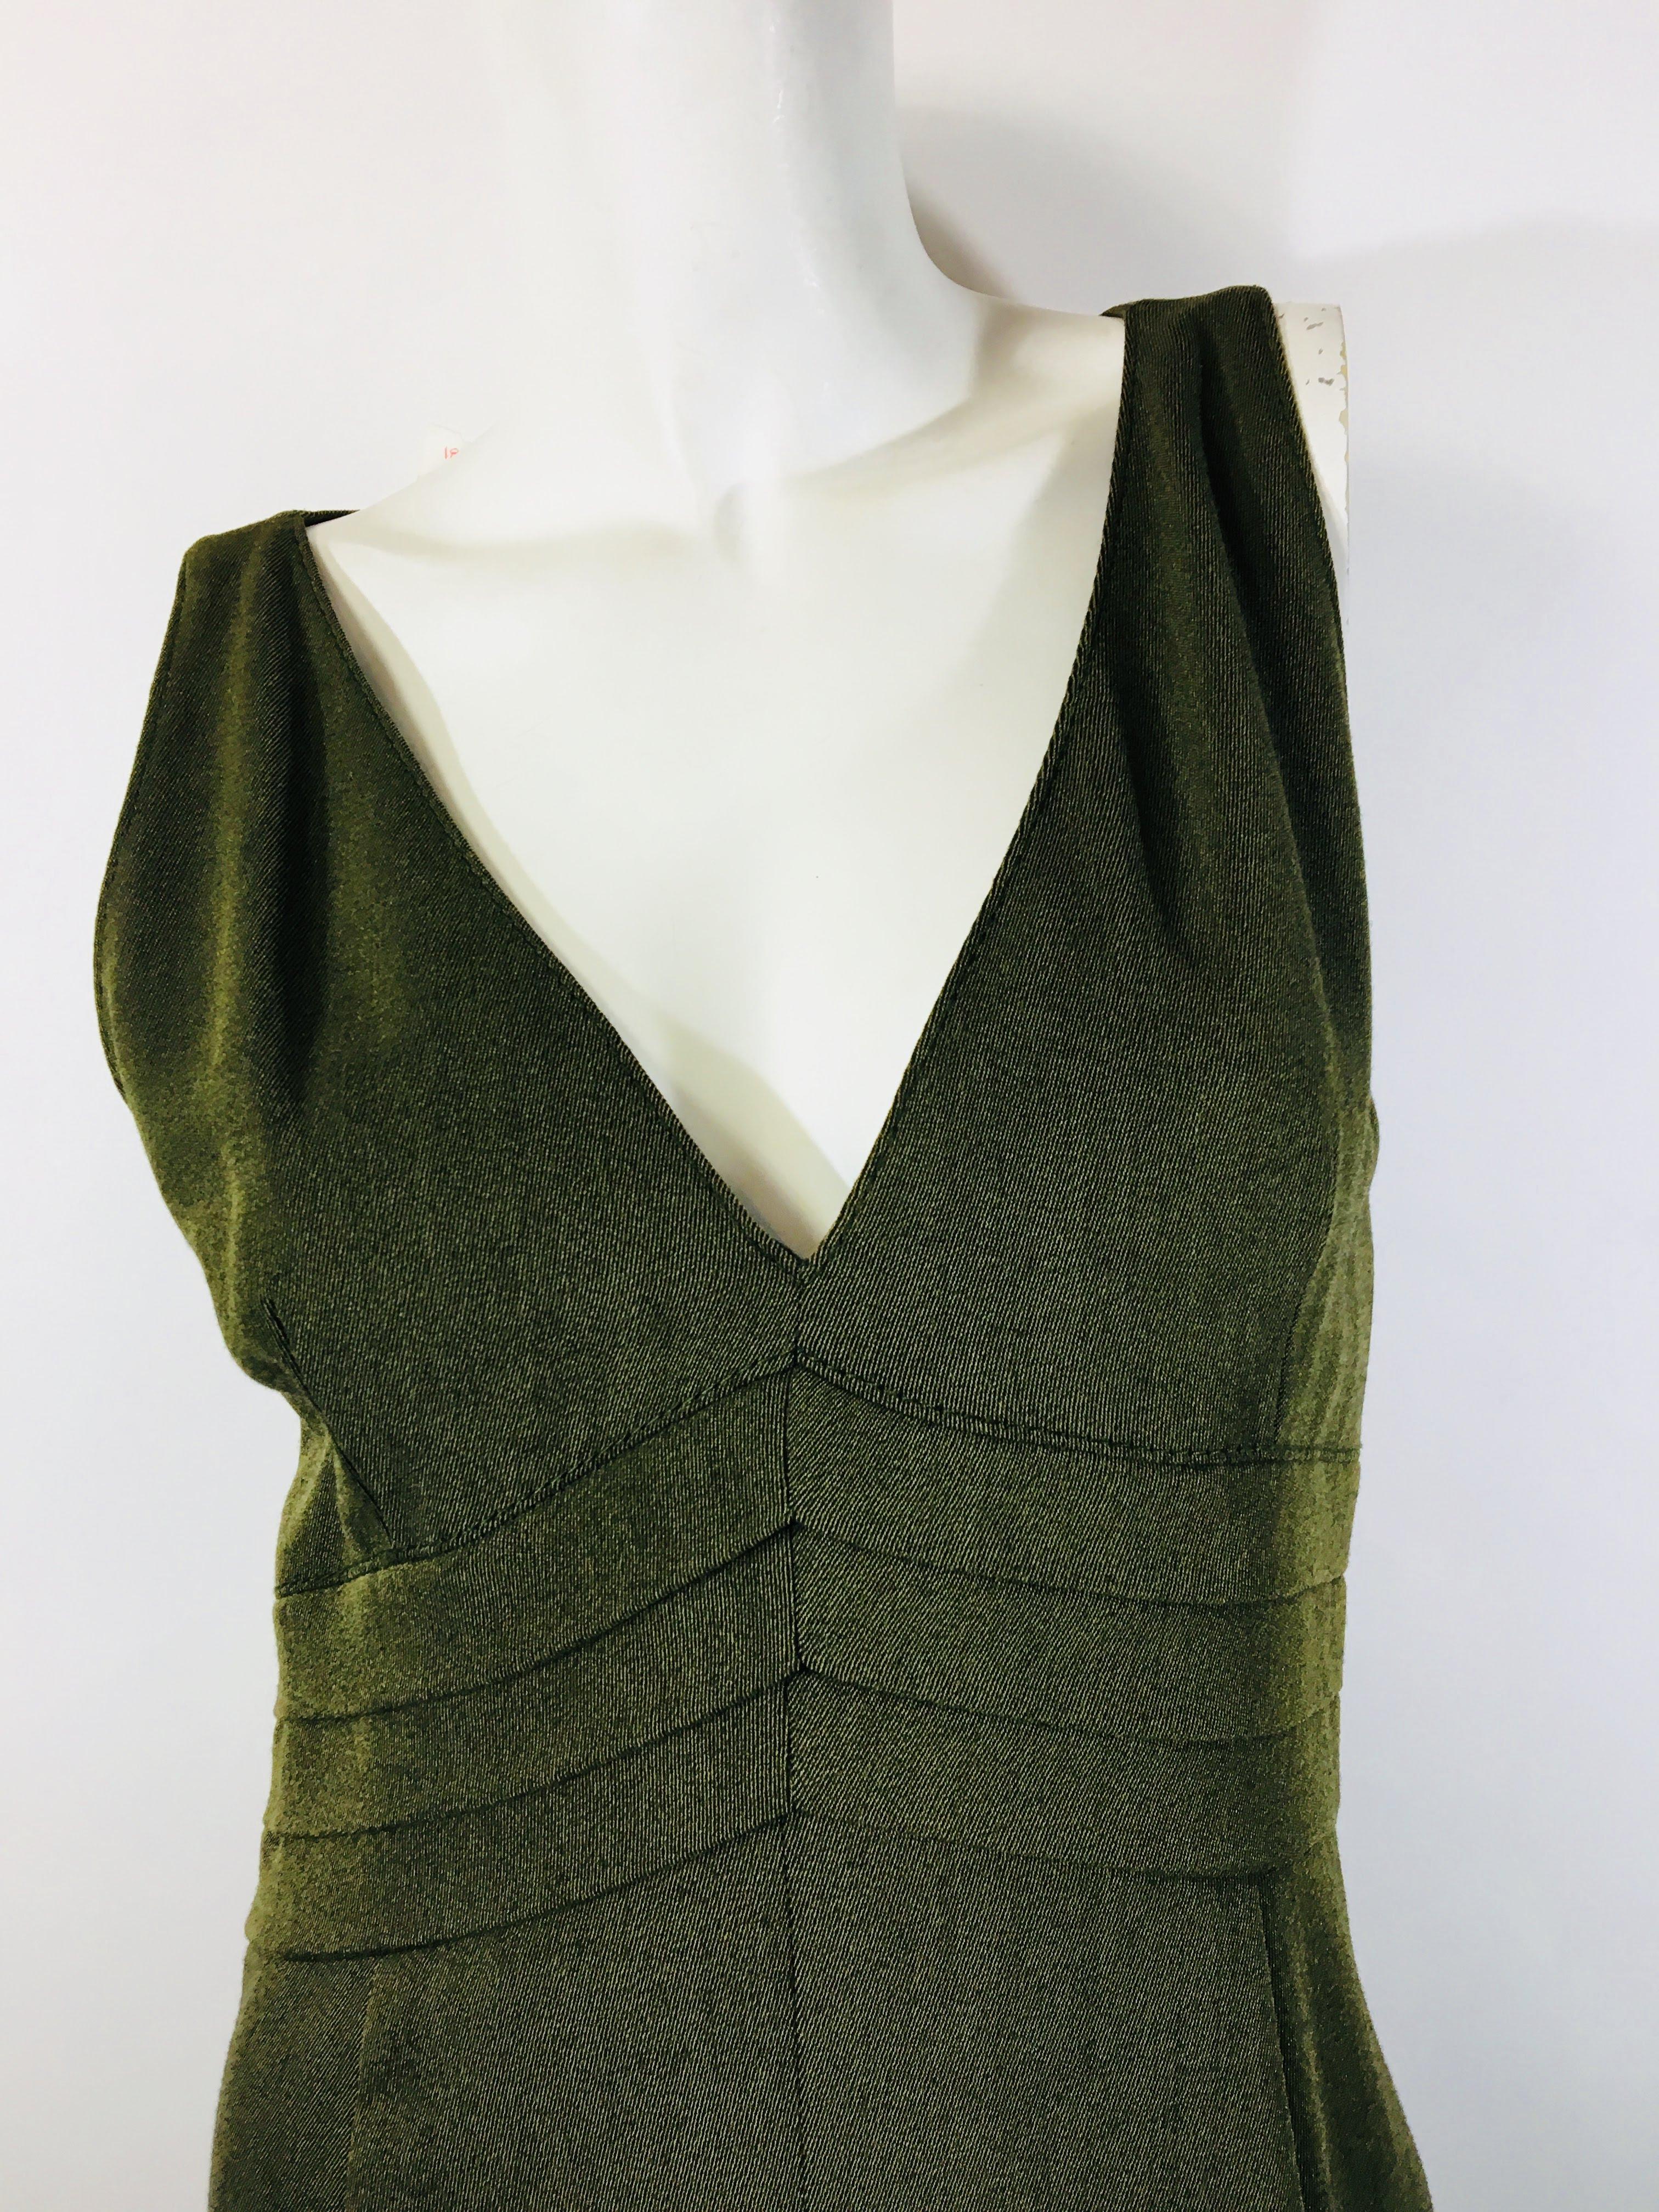 Valentino Sleeveless Dress with Pleated Chevron Waist. Knee Length  with Back Zipper in Olive Green.